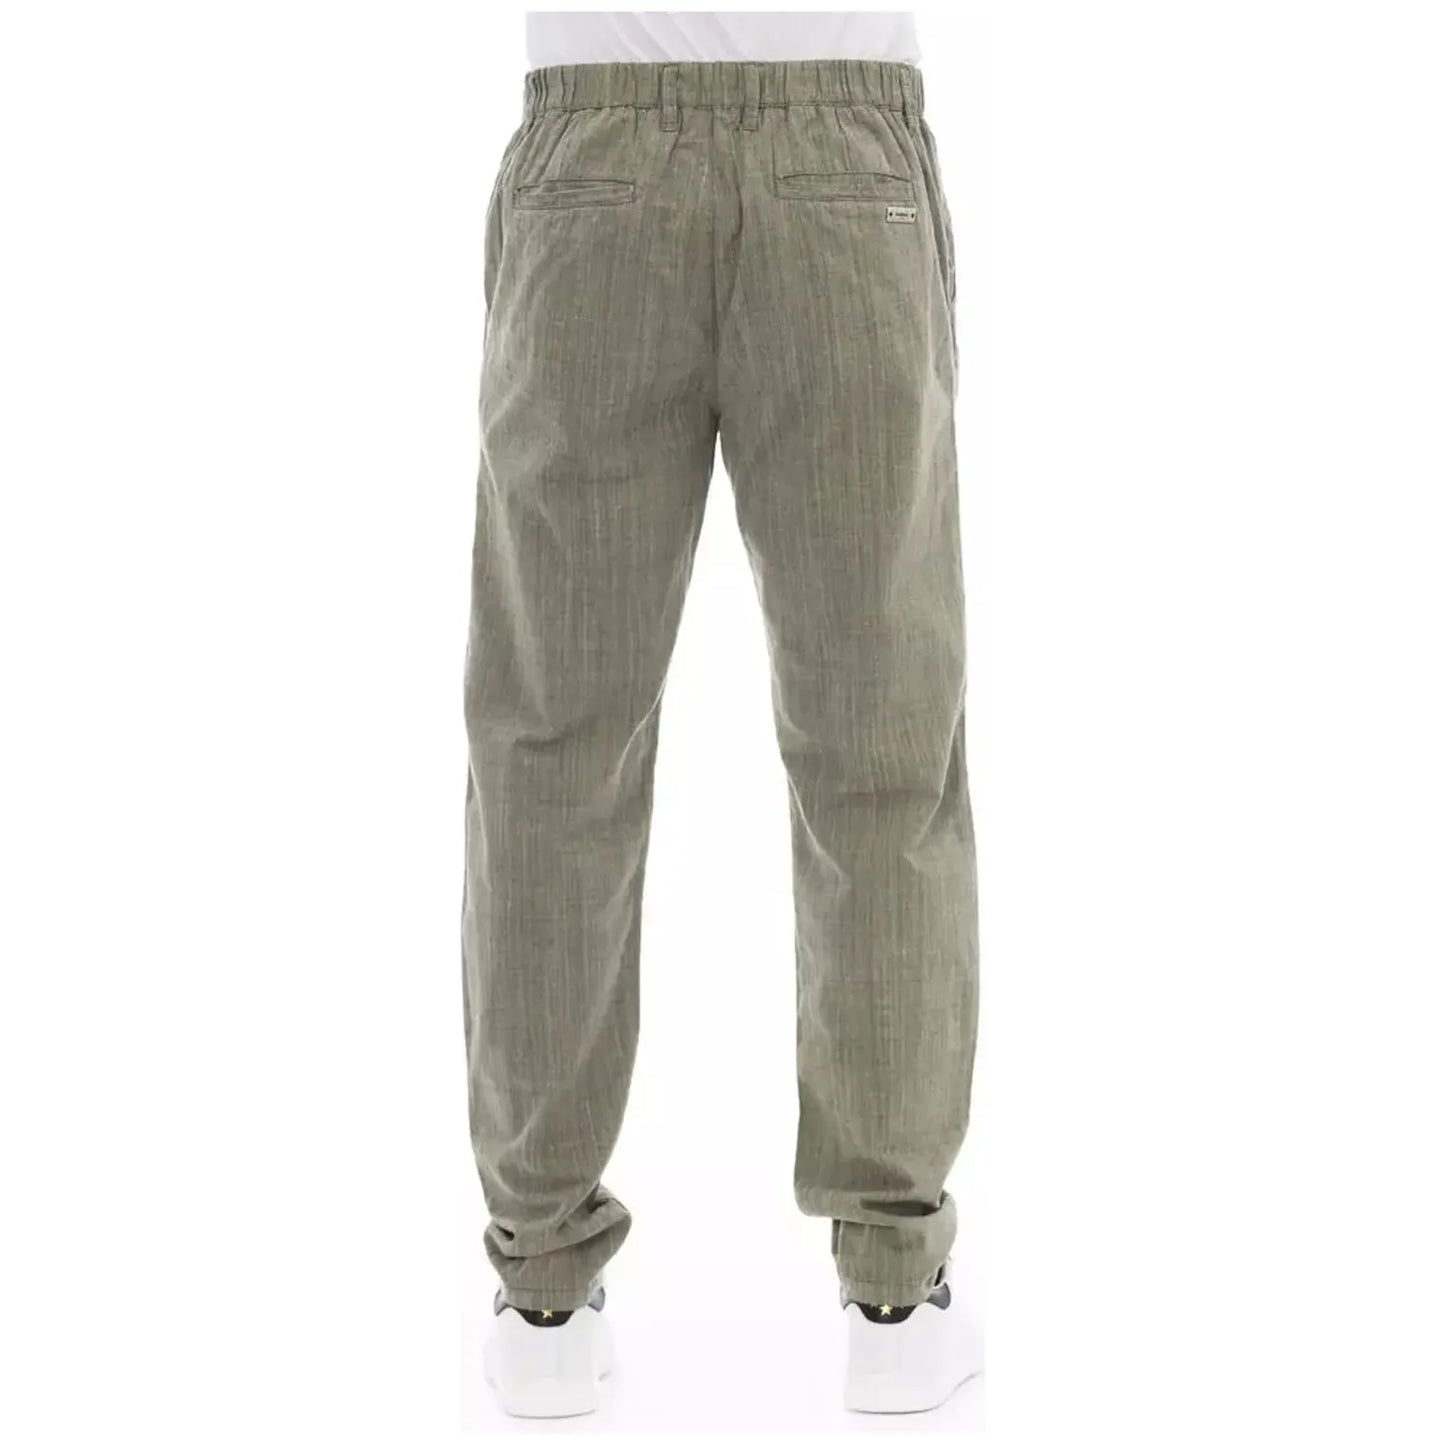 Baldinini Trend Elevated Army Chino Trousers for Men army-cotton-jeans-pant-5 product-23129-2142164029-21-5f5fac87-1ab.webp